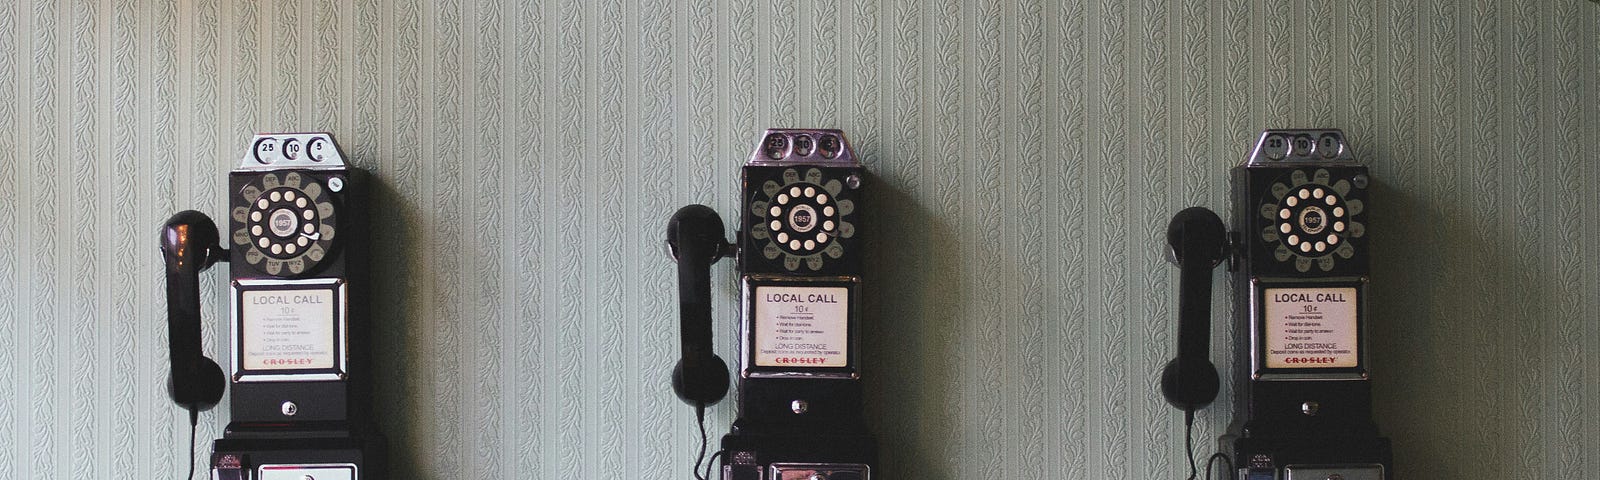 This is a photo of 3 old fashioned coin telephones